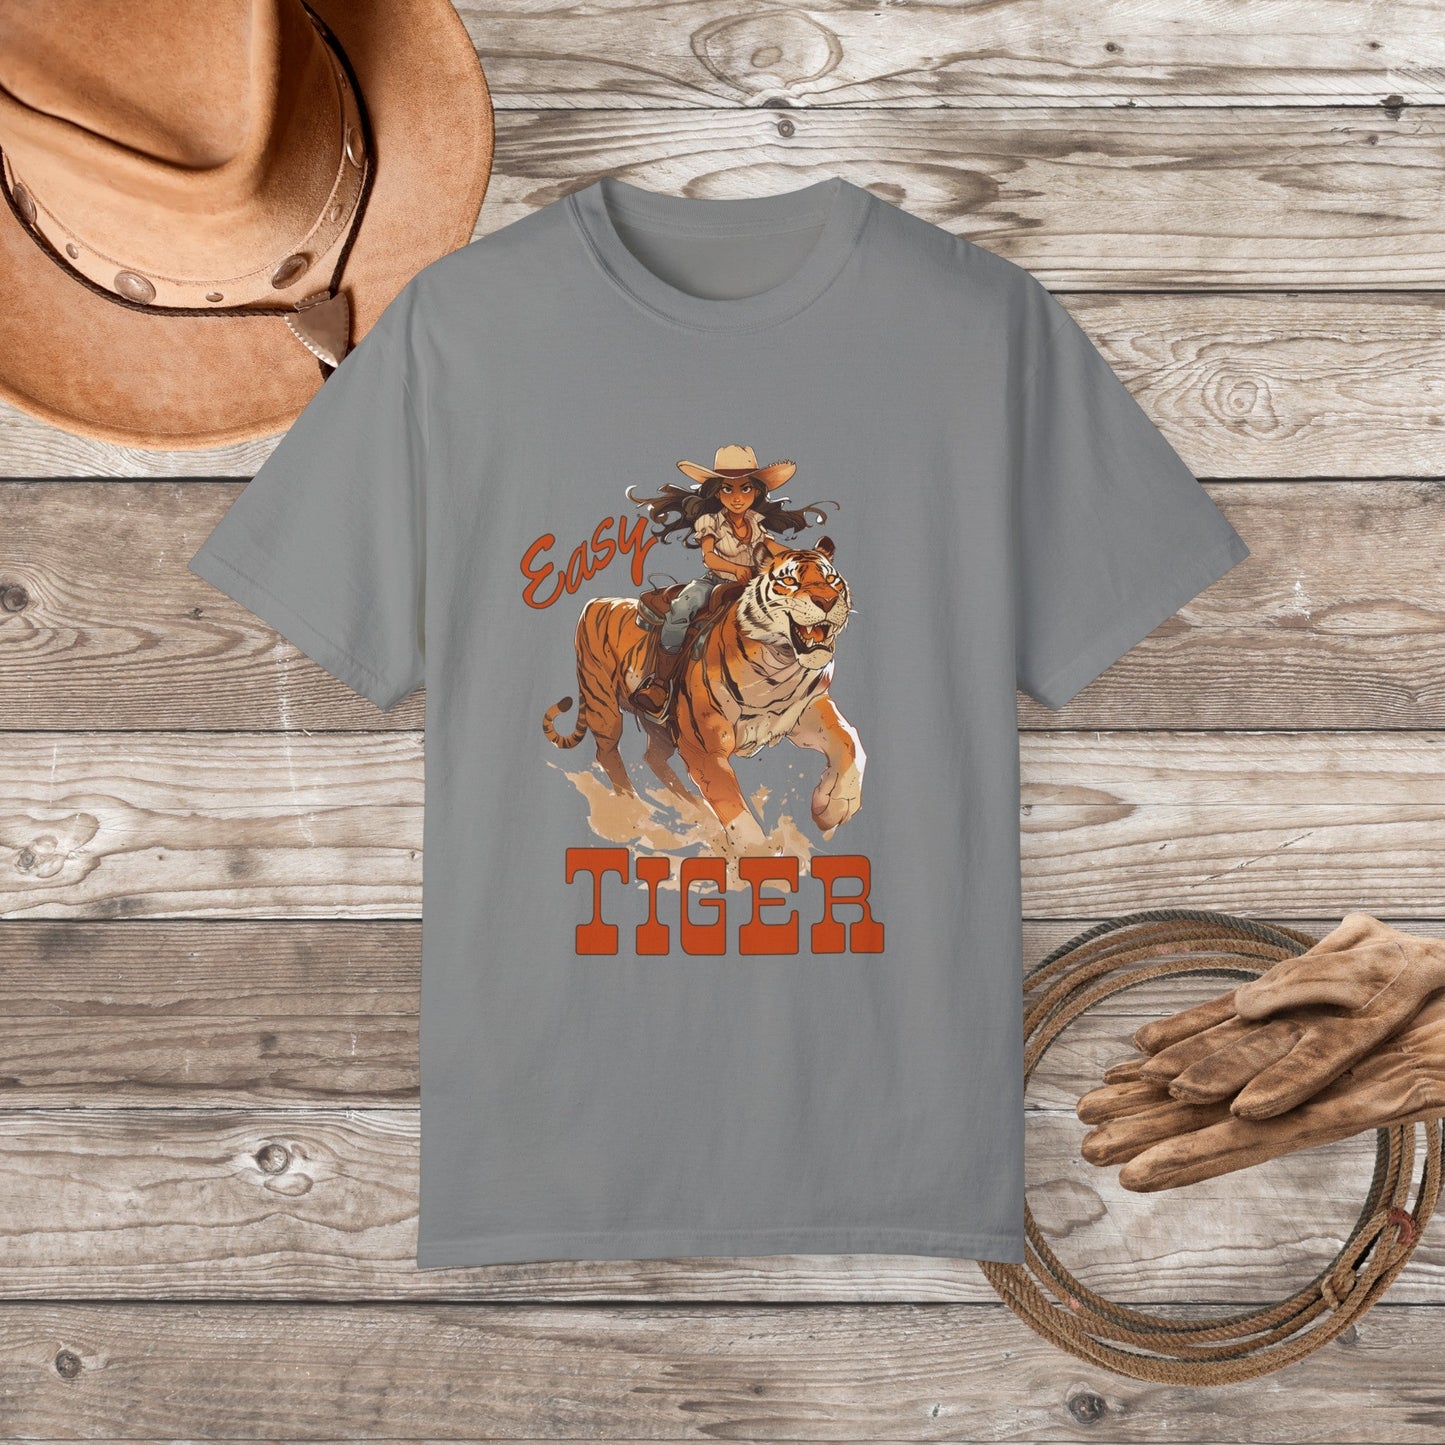 Cowgirl Shirt, Easy Tiger, Country Concert Tee, Western Graphic Tee, Oversized Cowgirl Tee - FlooredByArt